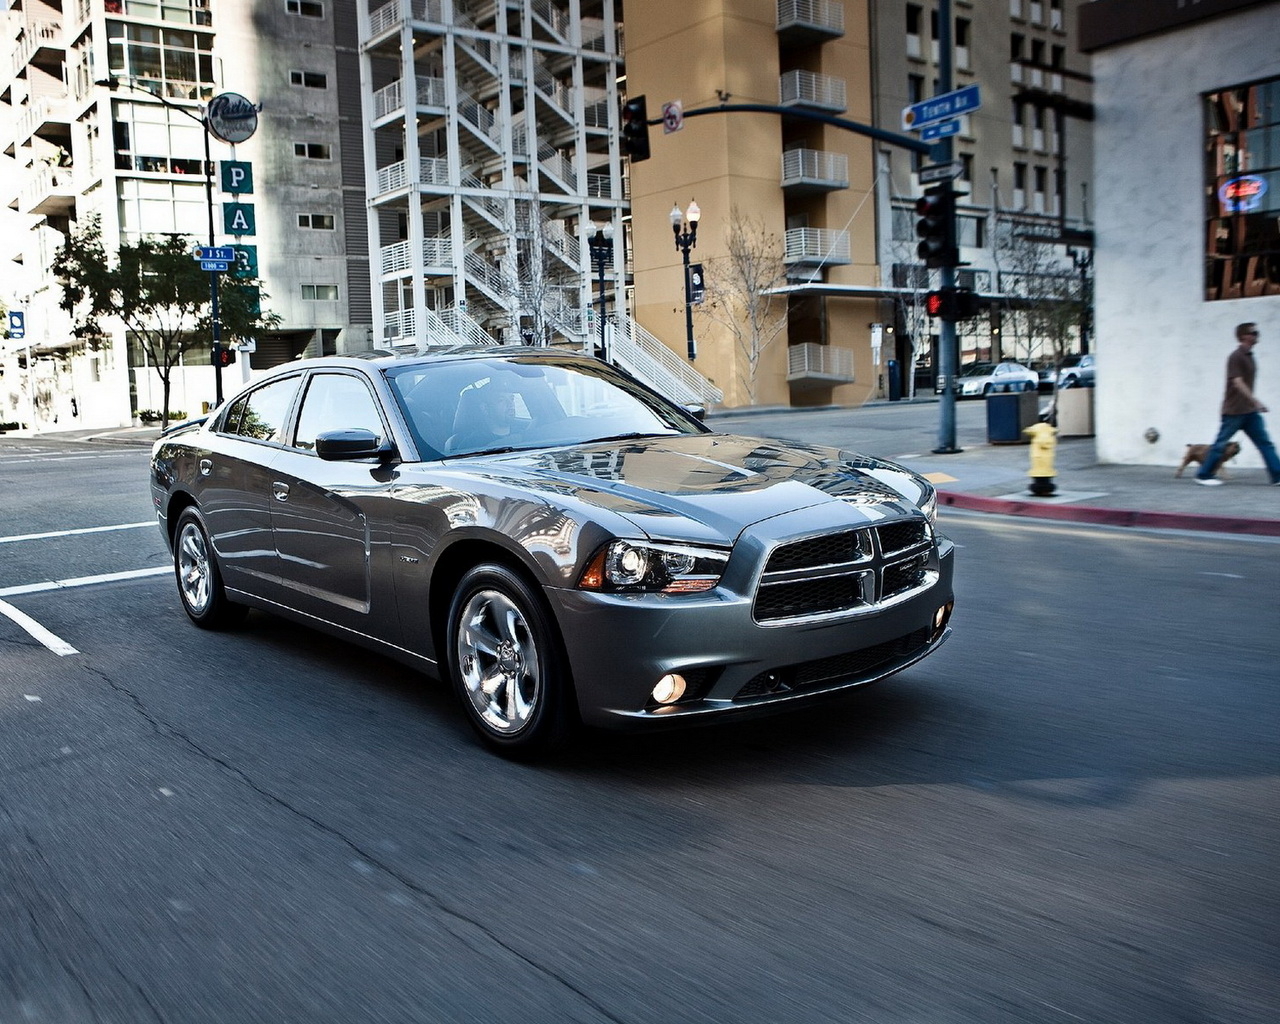 Dodge-Charger 2011